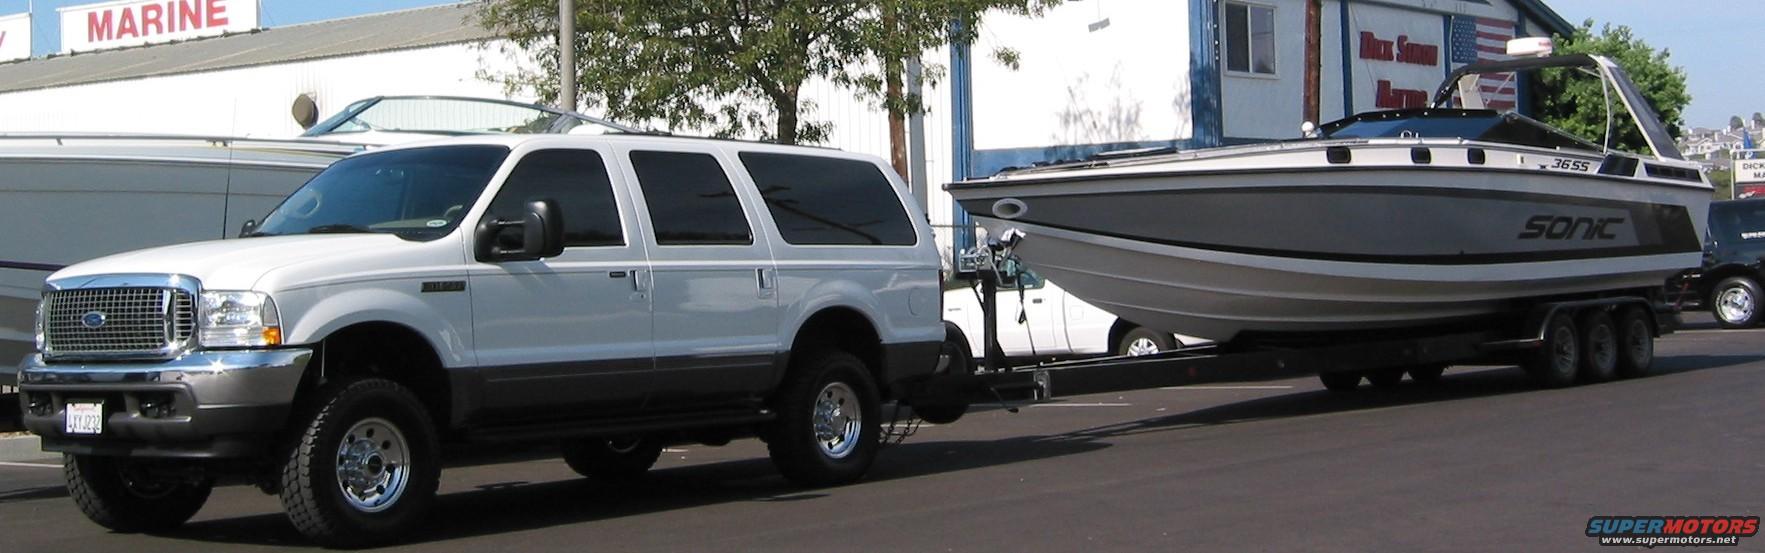 2002 Ford excursion diesel towing capacity #2